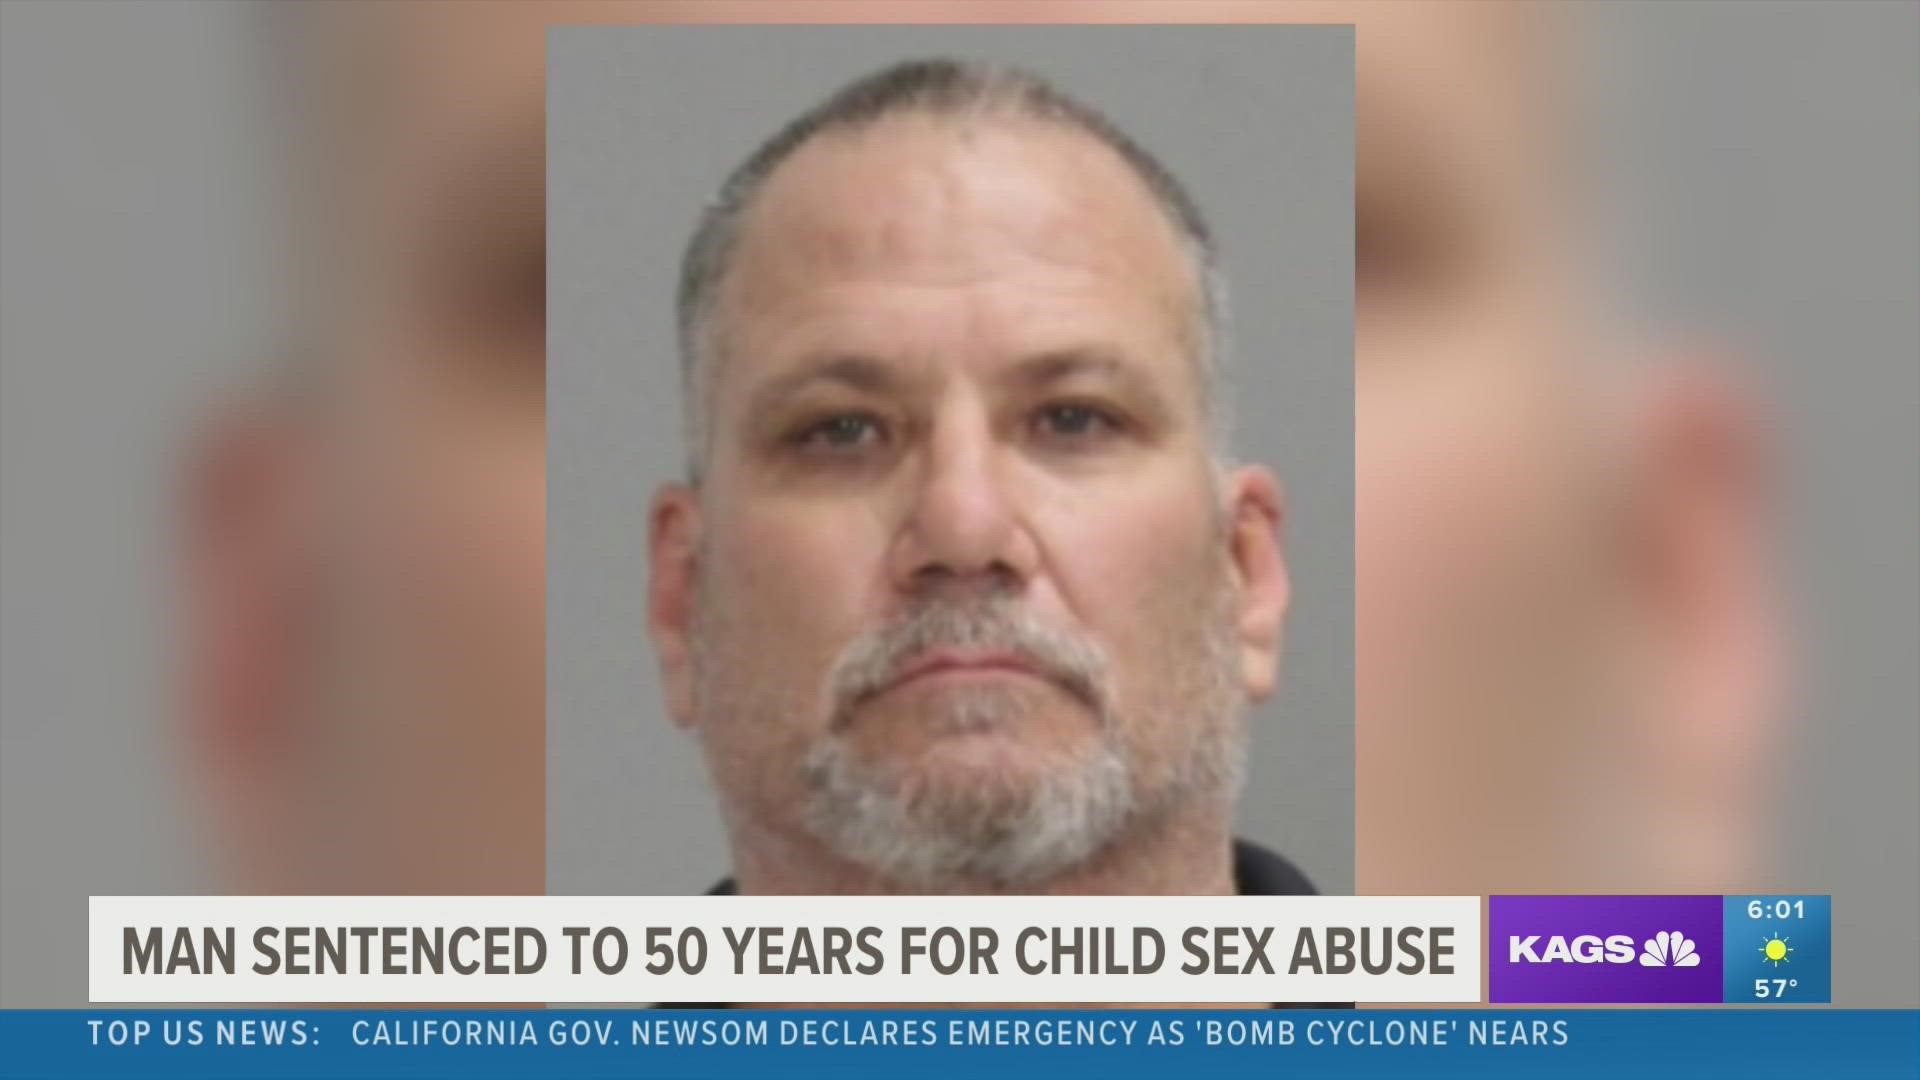 50 Guys 50 Girls Xxx Videos - Authorities: Man given 50 year sentence for child sexual crimes | kagstv.com